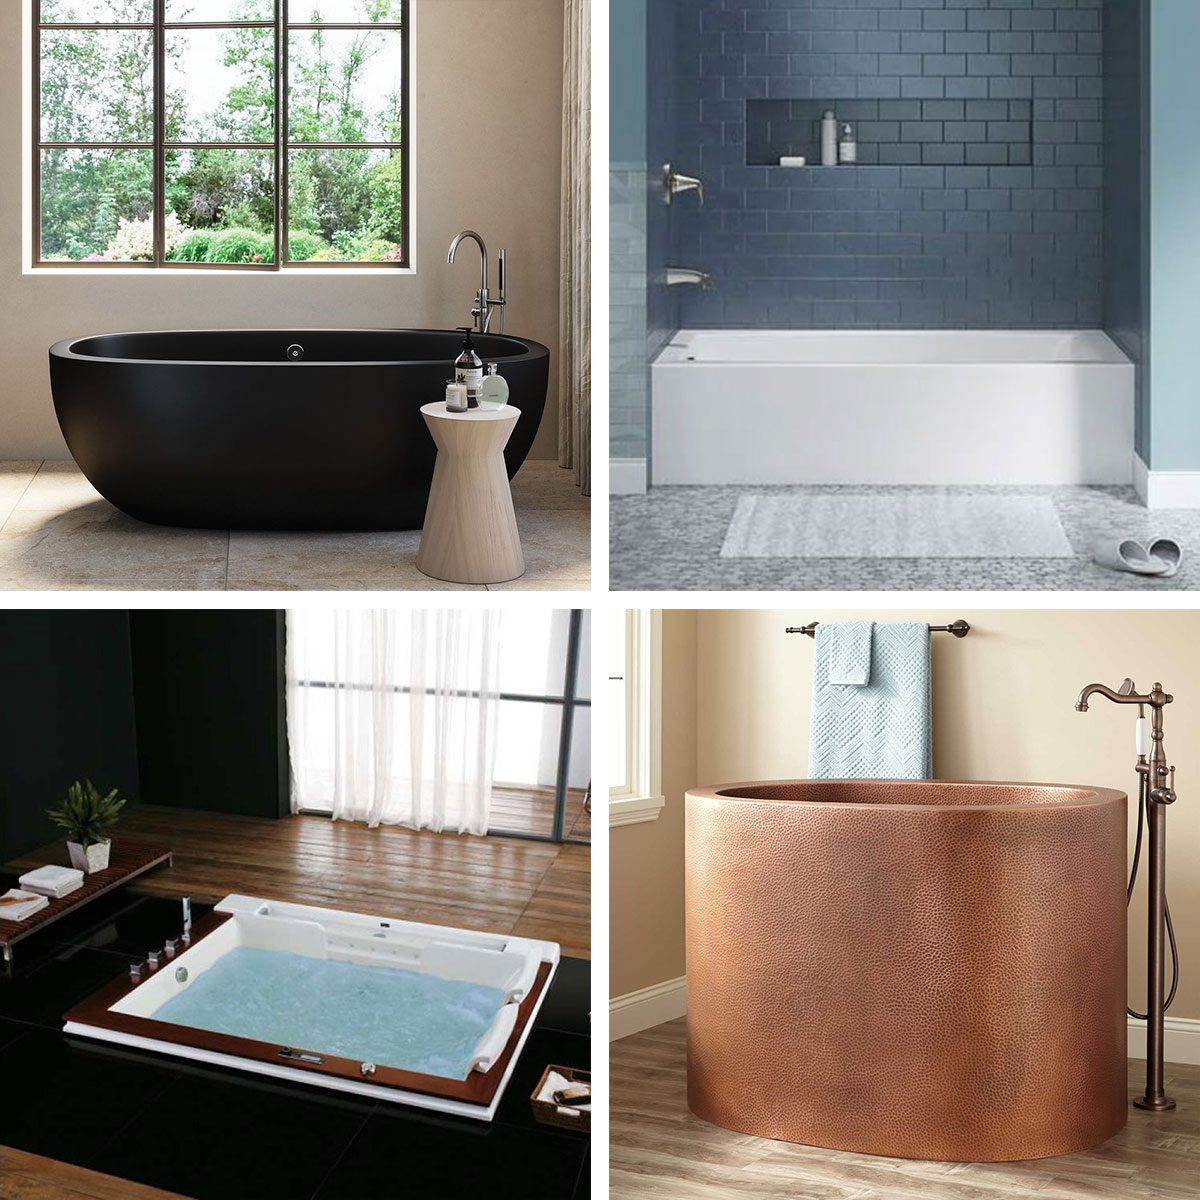 Best Bathtubs To For Your Bathroom, What Company Makes The Best Bathtubs